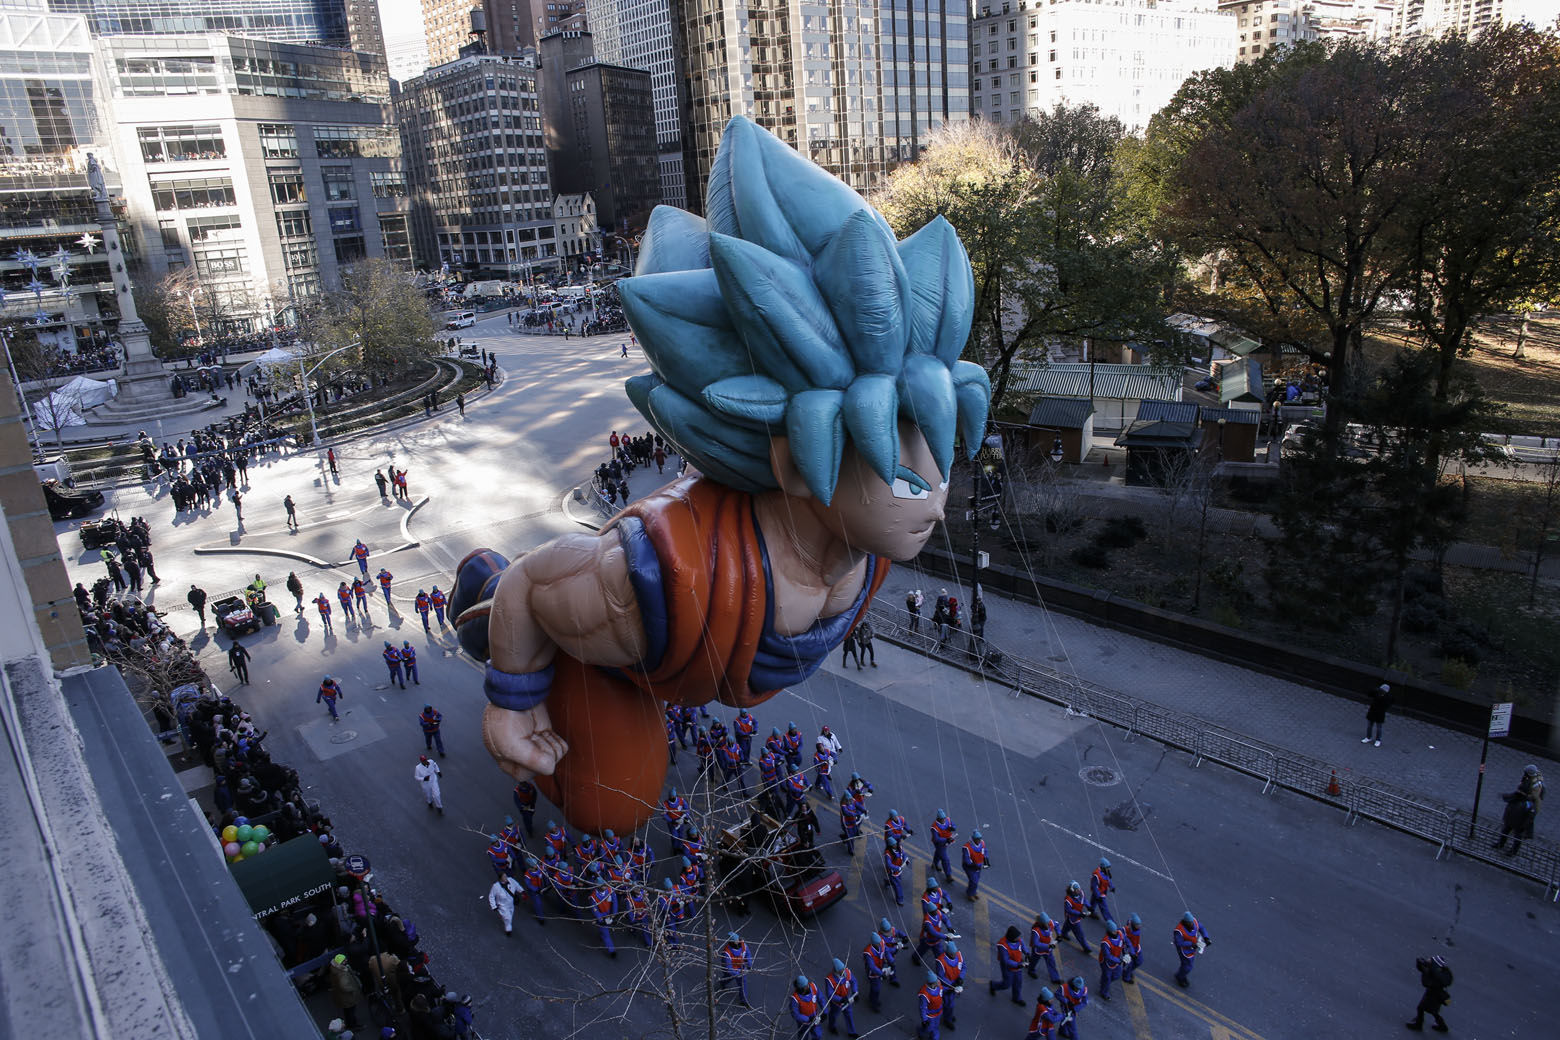 NEW YORK, NY - NOVEMBER 22: Coku balloon floats during the 92nd annual Macy's Thanksgiving Day Parade on November 22, 2018 in New York City. (Photo by Kena Betancur/Getty Images)